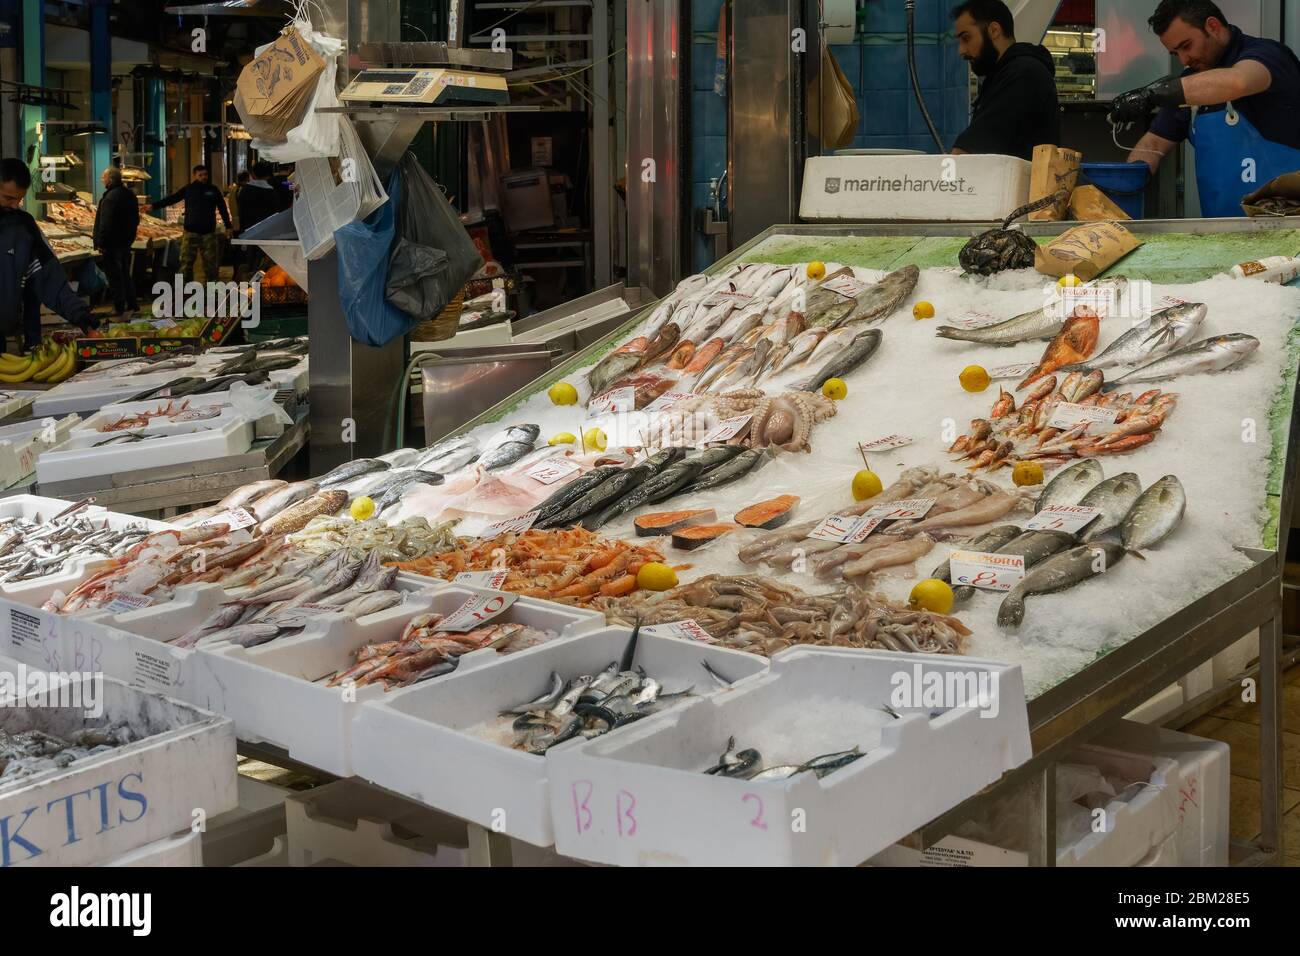 Thessaloniki, Greece Seafood counter with prices in Euros at Kapani covered market. Shops selling fresh raw fish arranged on ice. Stock Photo